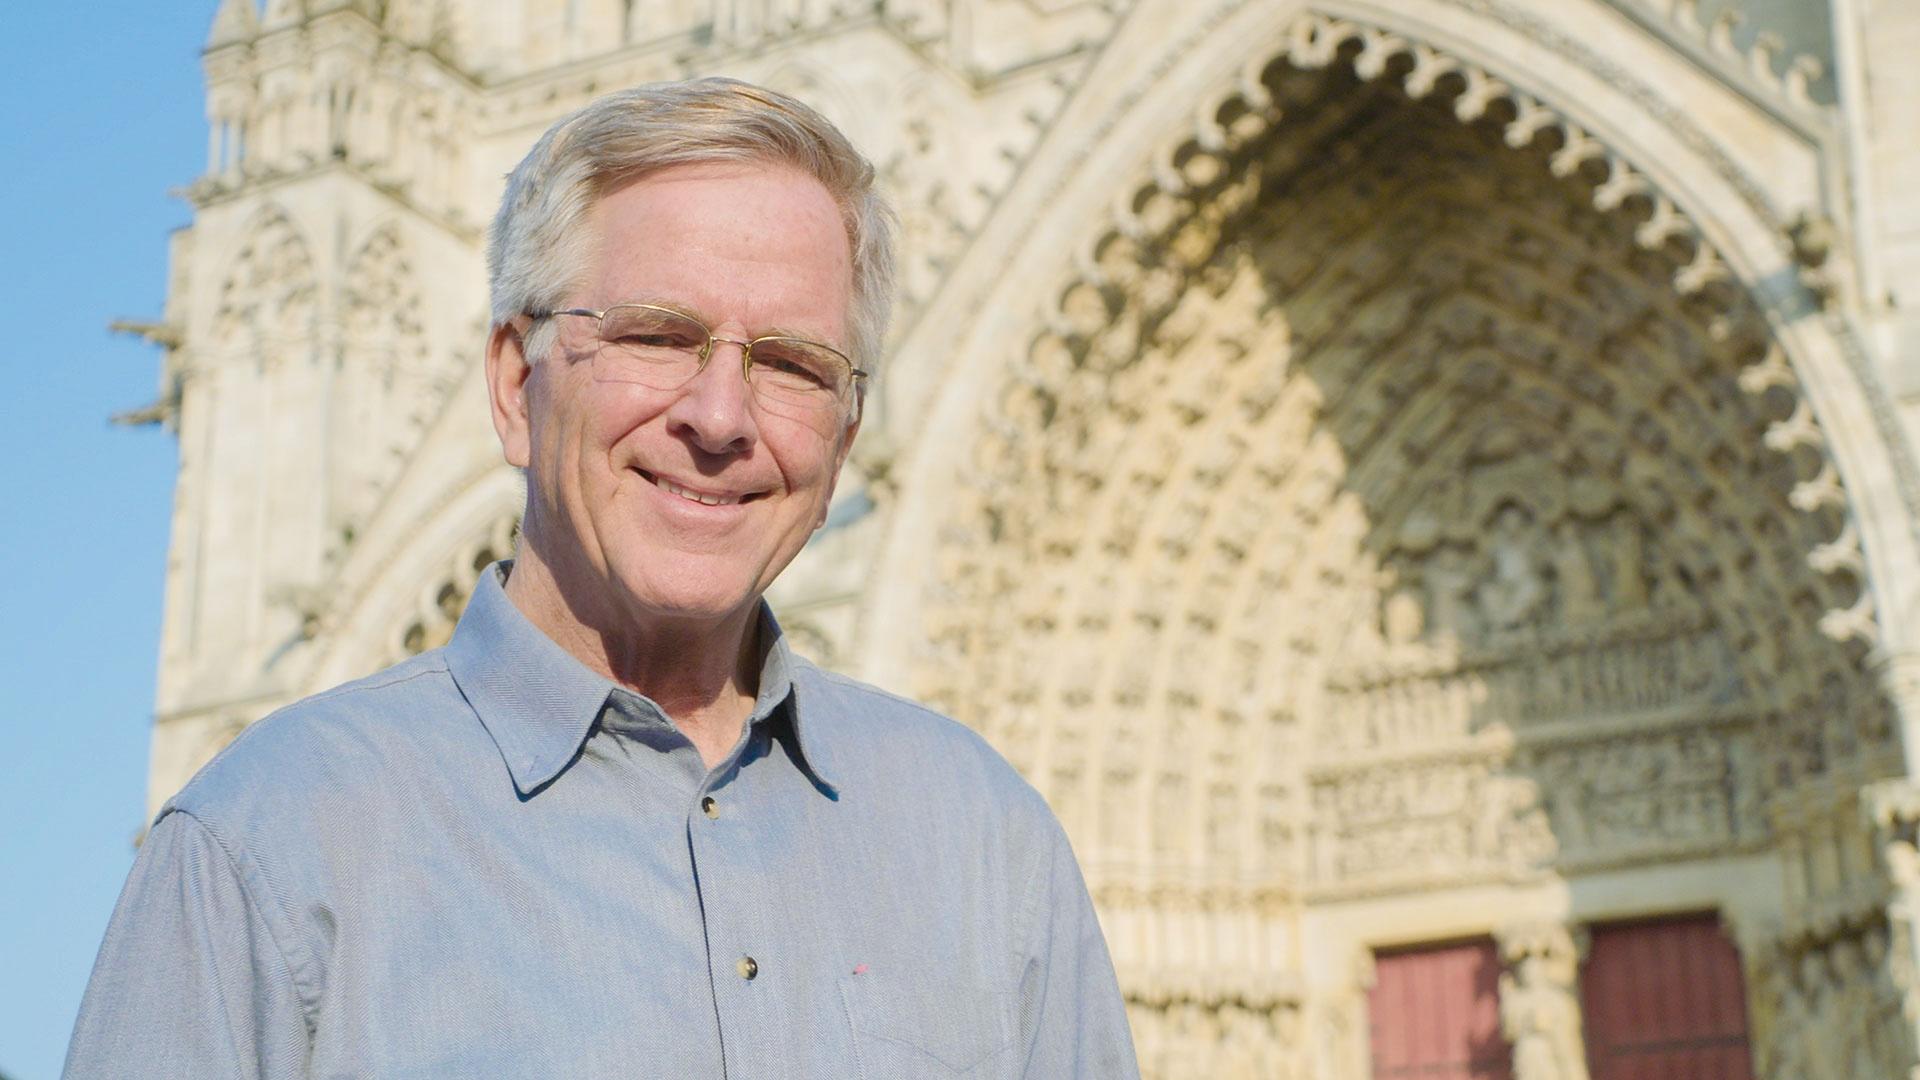 Art of Europe: The Middle Ages - Video - Rick Steves Europe